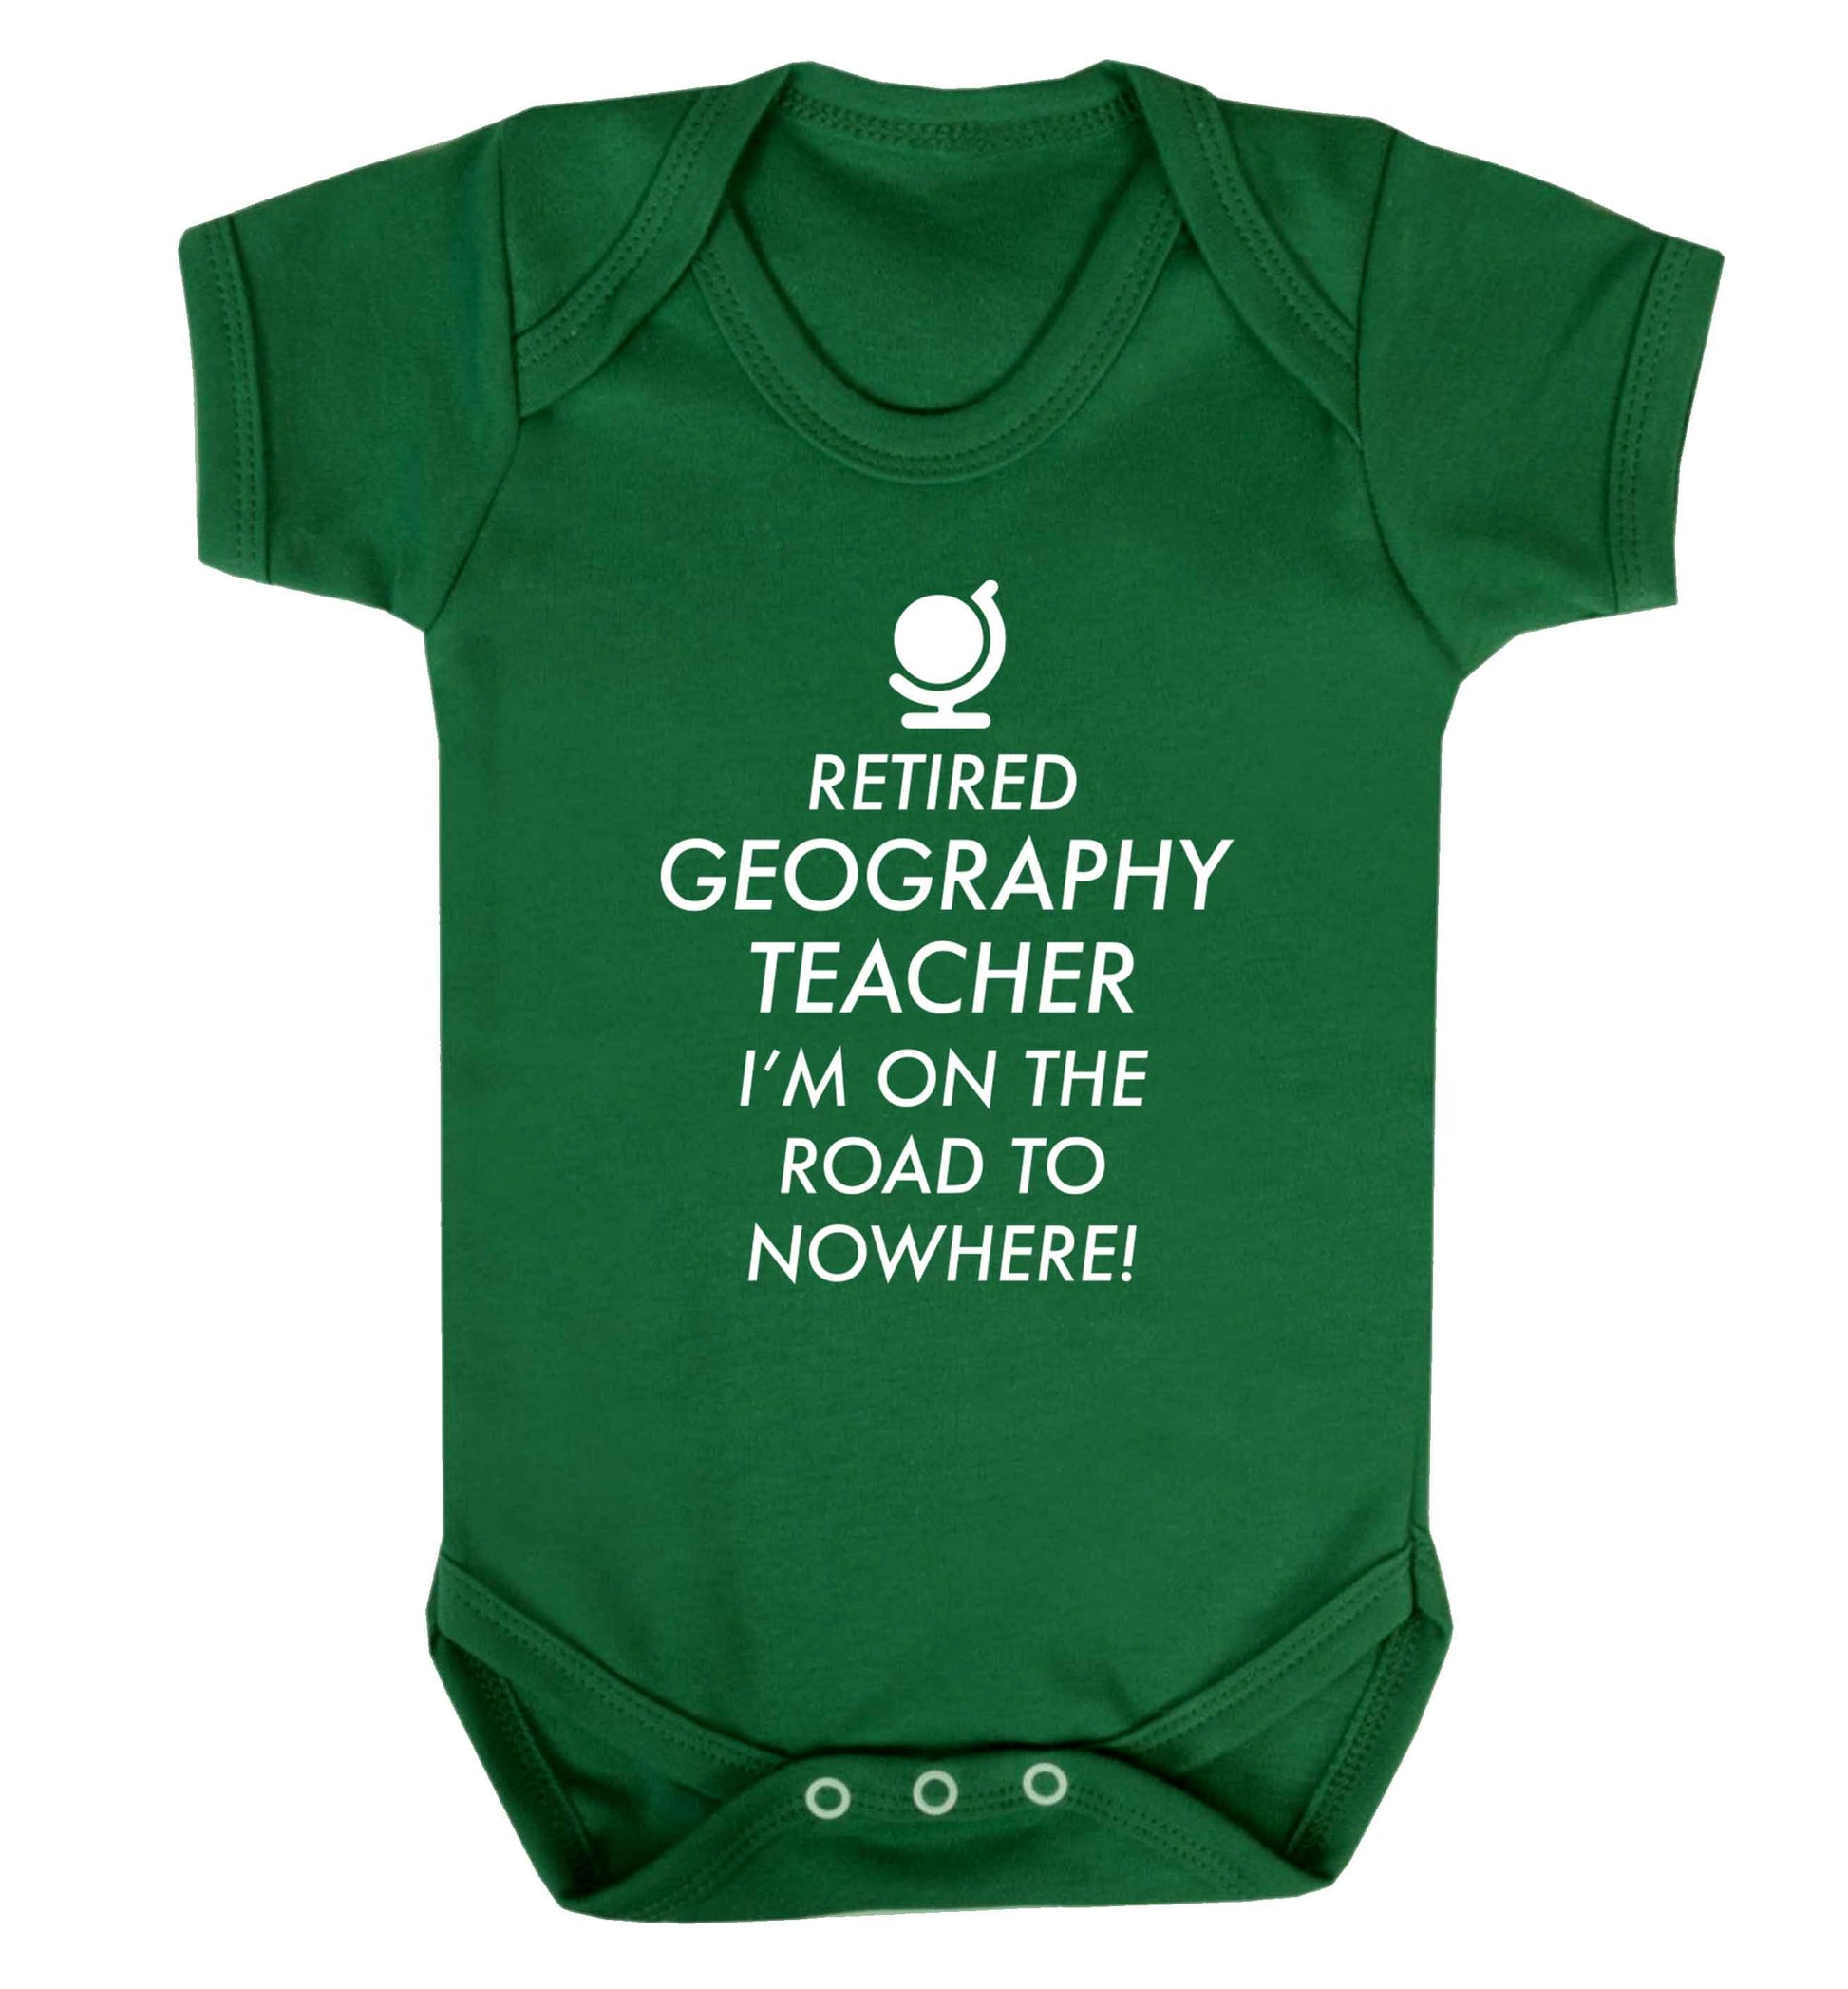 Retired geography teacher I'm on the road to nowhere Baby Vest green 18-24 months